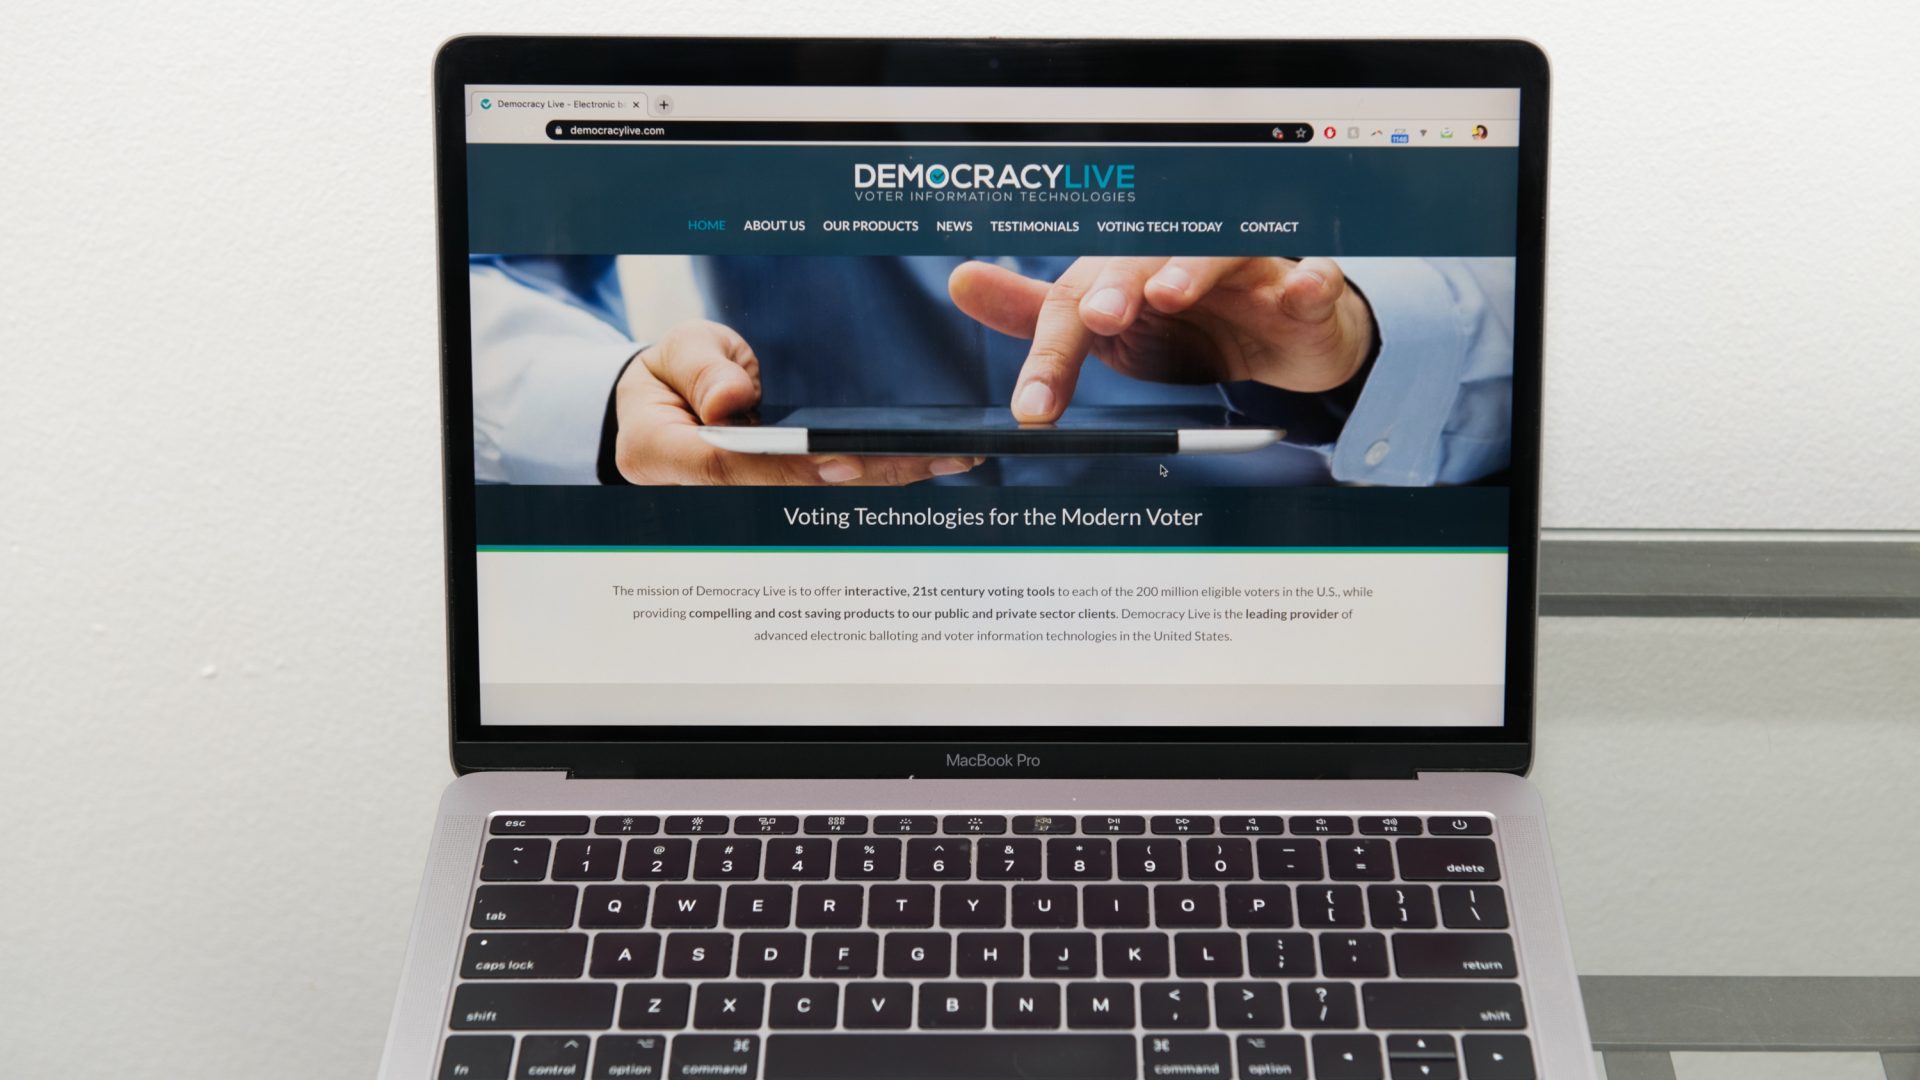 The Democracy Live home page is displayed on an Apple laptop computer. The company is administering a ballot return system for disabled voters in West Virginia, Delaware, and potentially New Jersey.